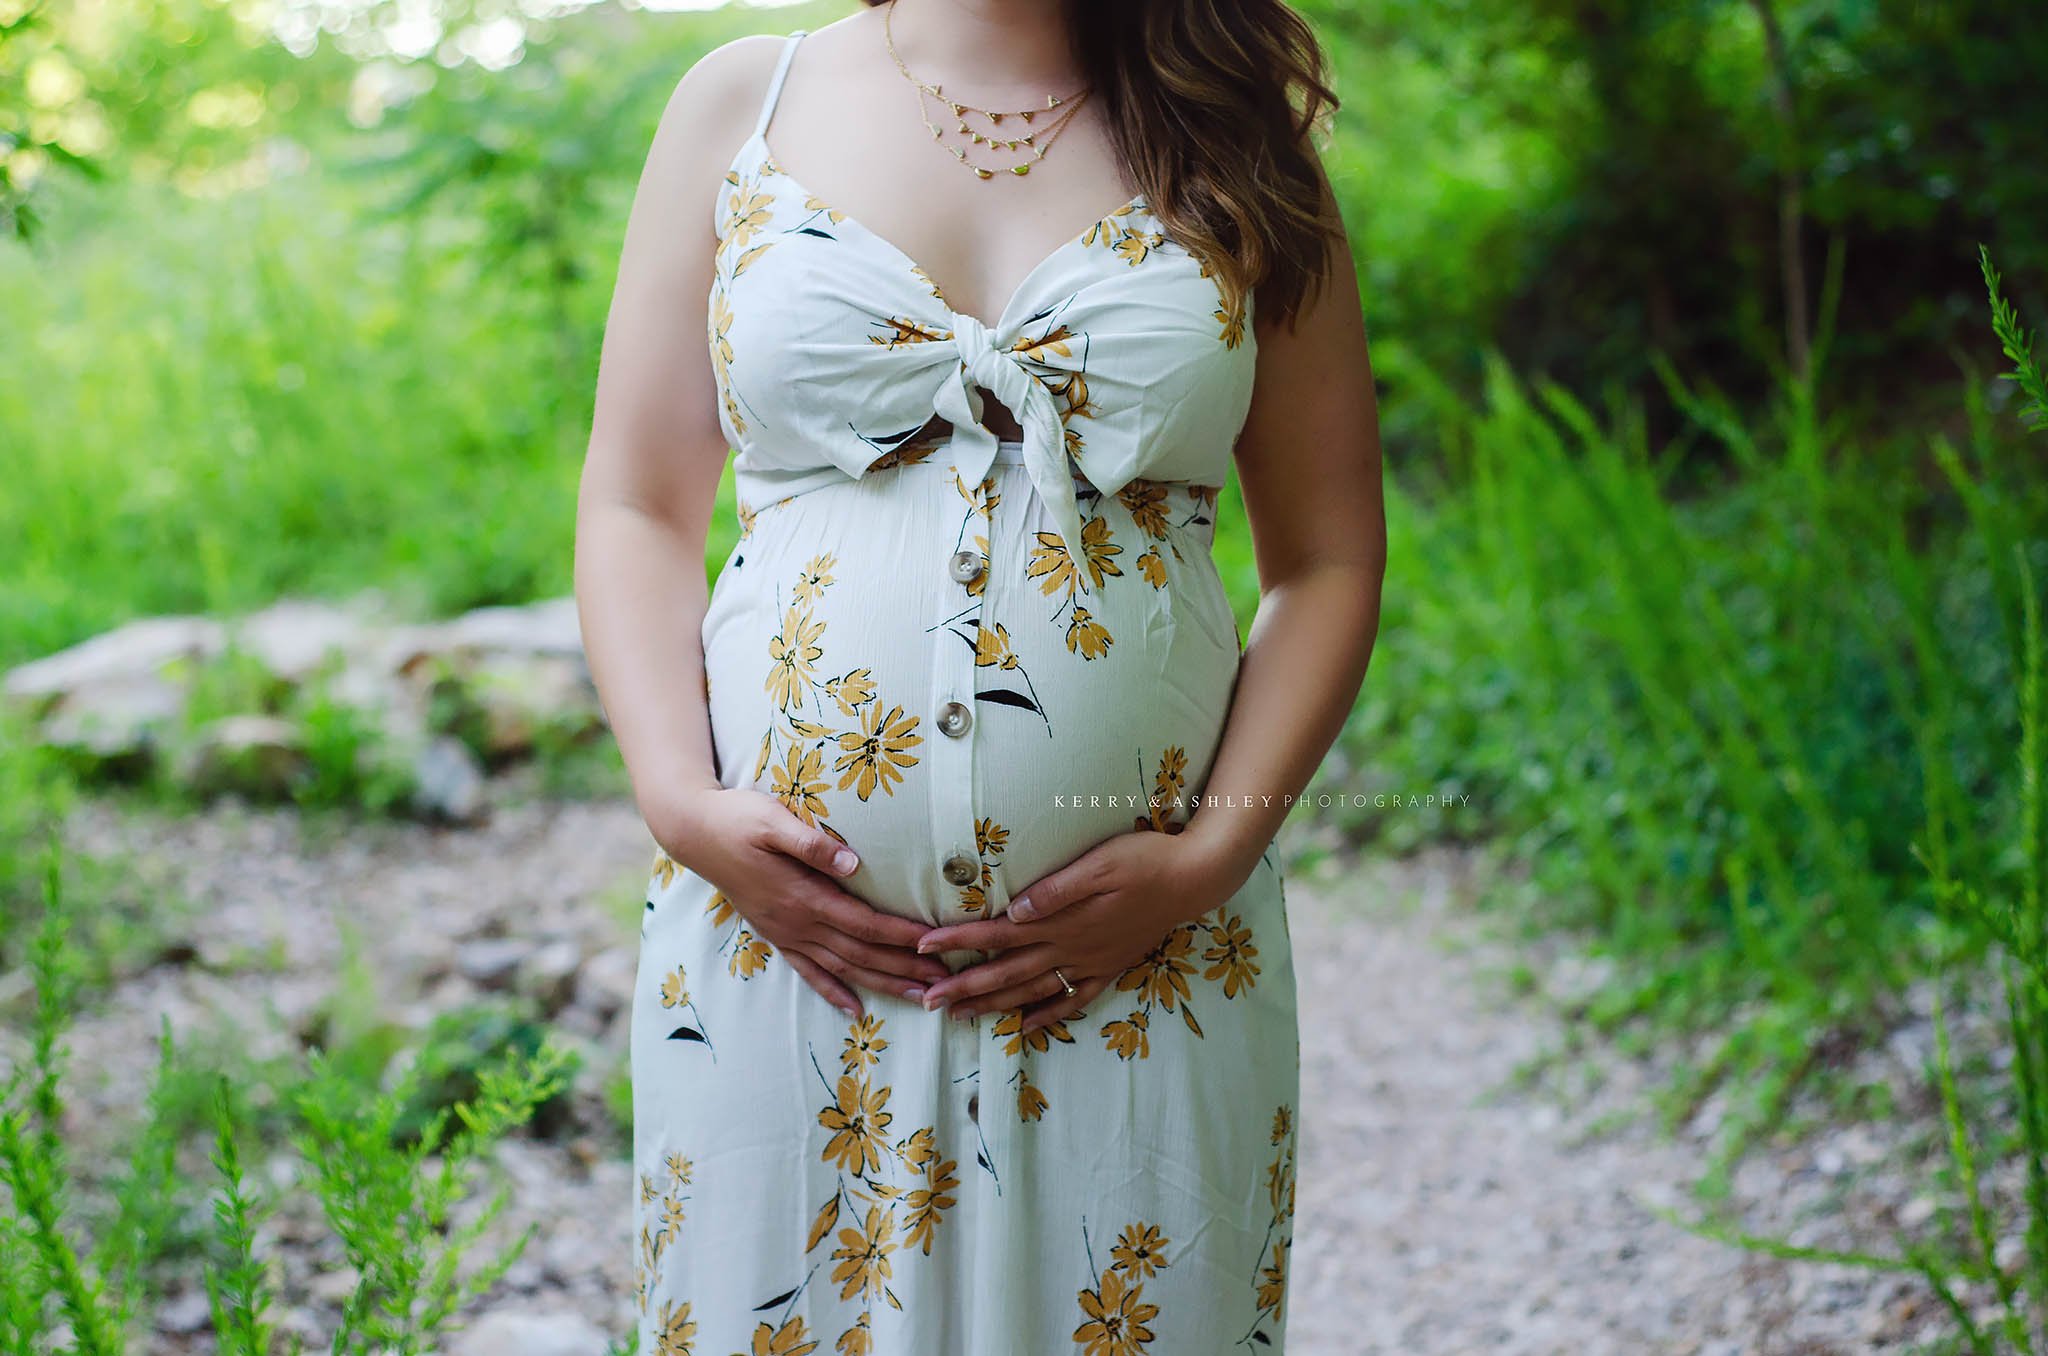 pregnant-lady-wearing-floral-dress-outdoors.jpg